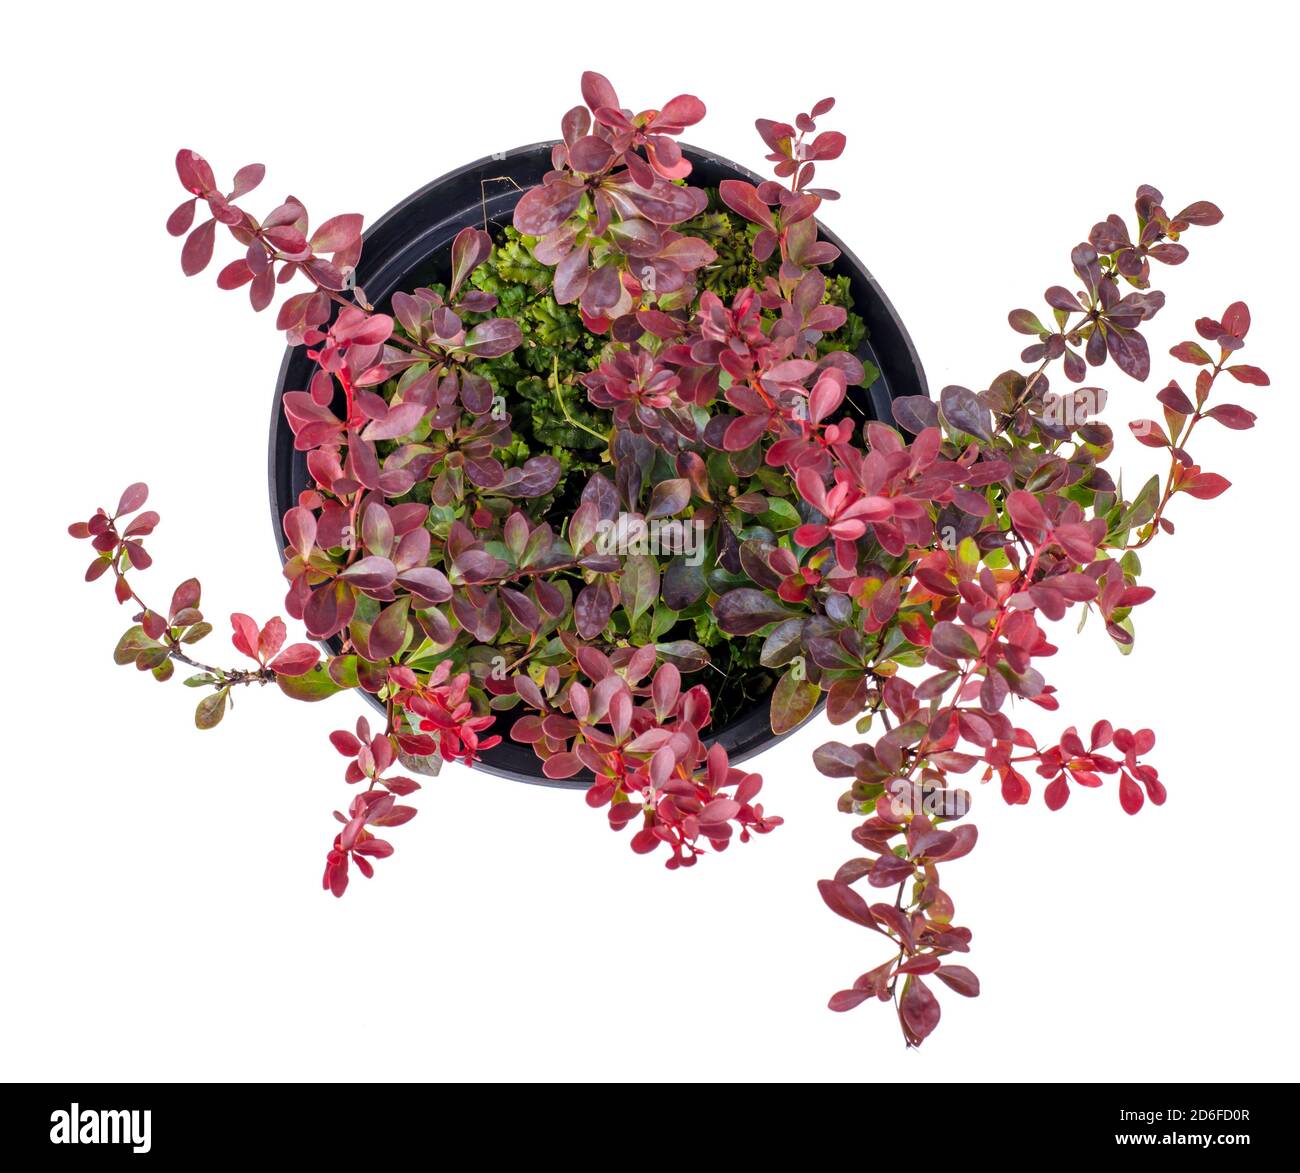 Bush of red-leaved thunberg barberry in container. Studio Photo Stock Photo